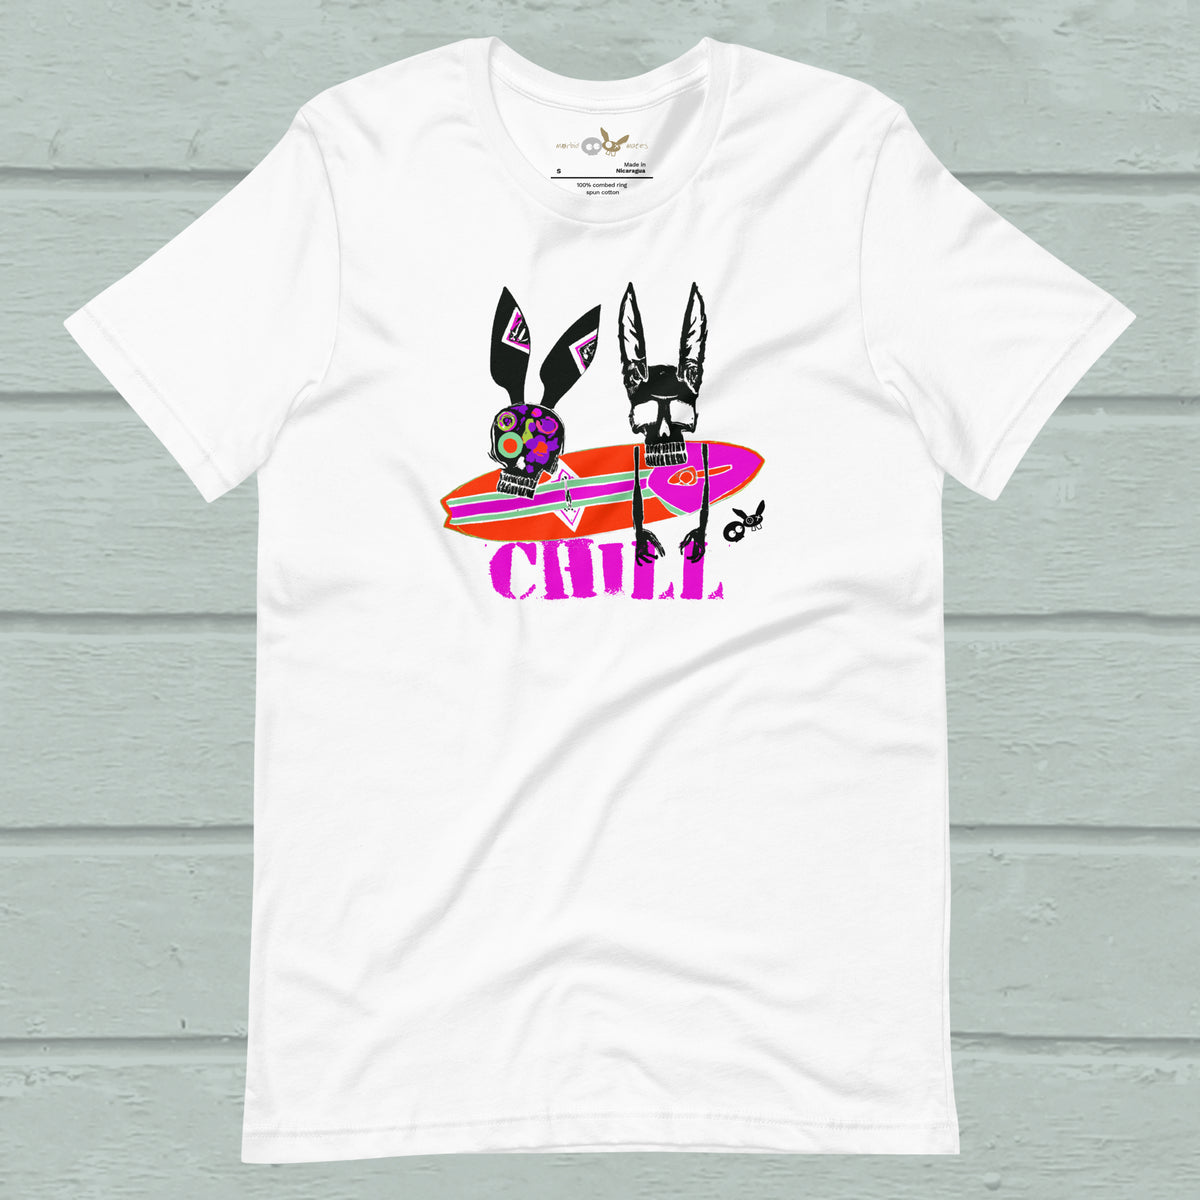 Chill TEE, pink